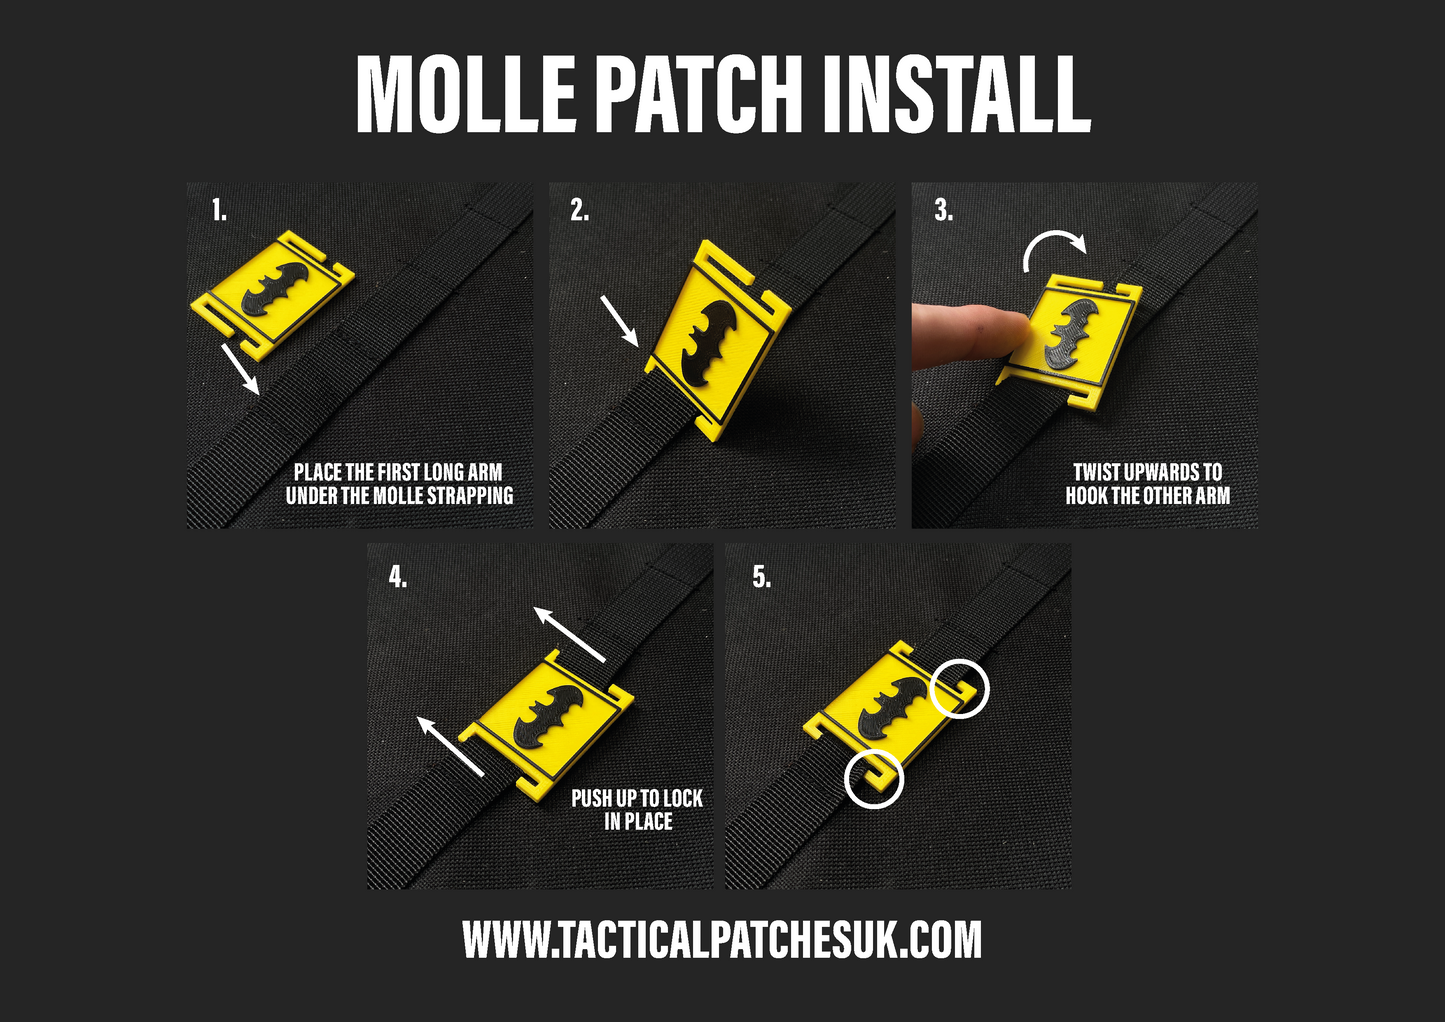 Sergeant Molle Patches